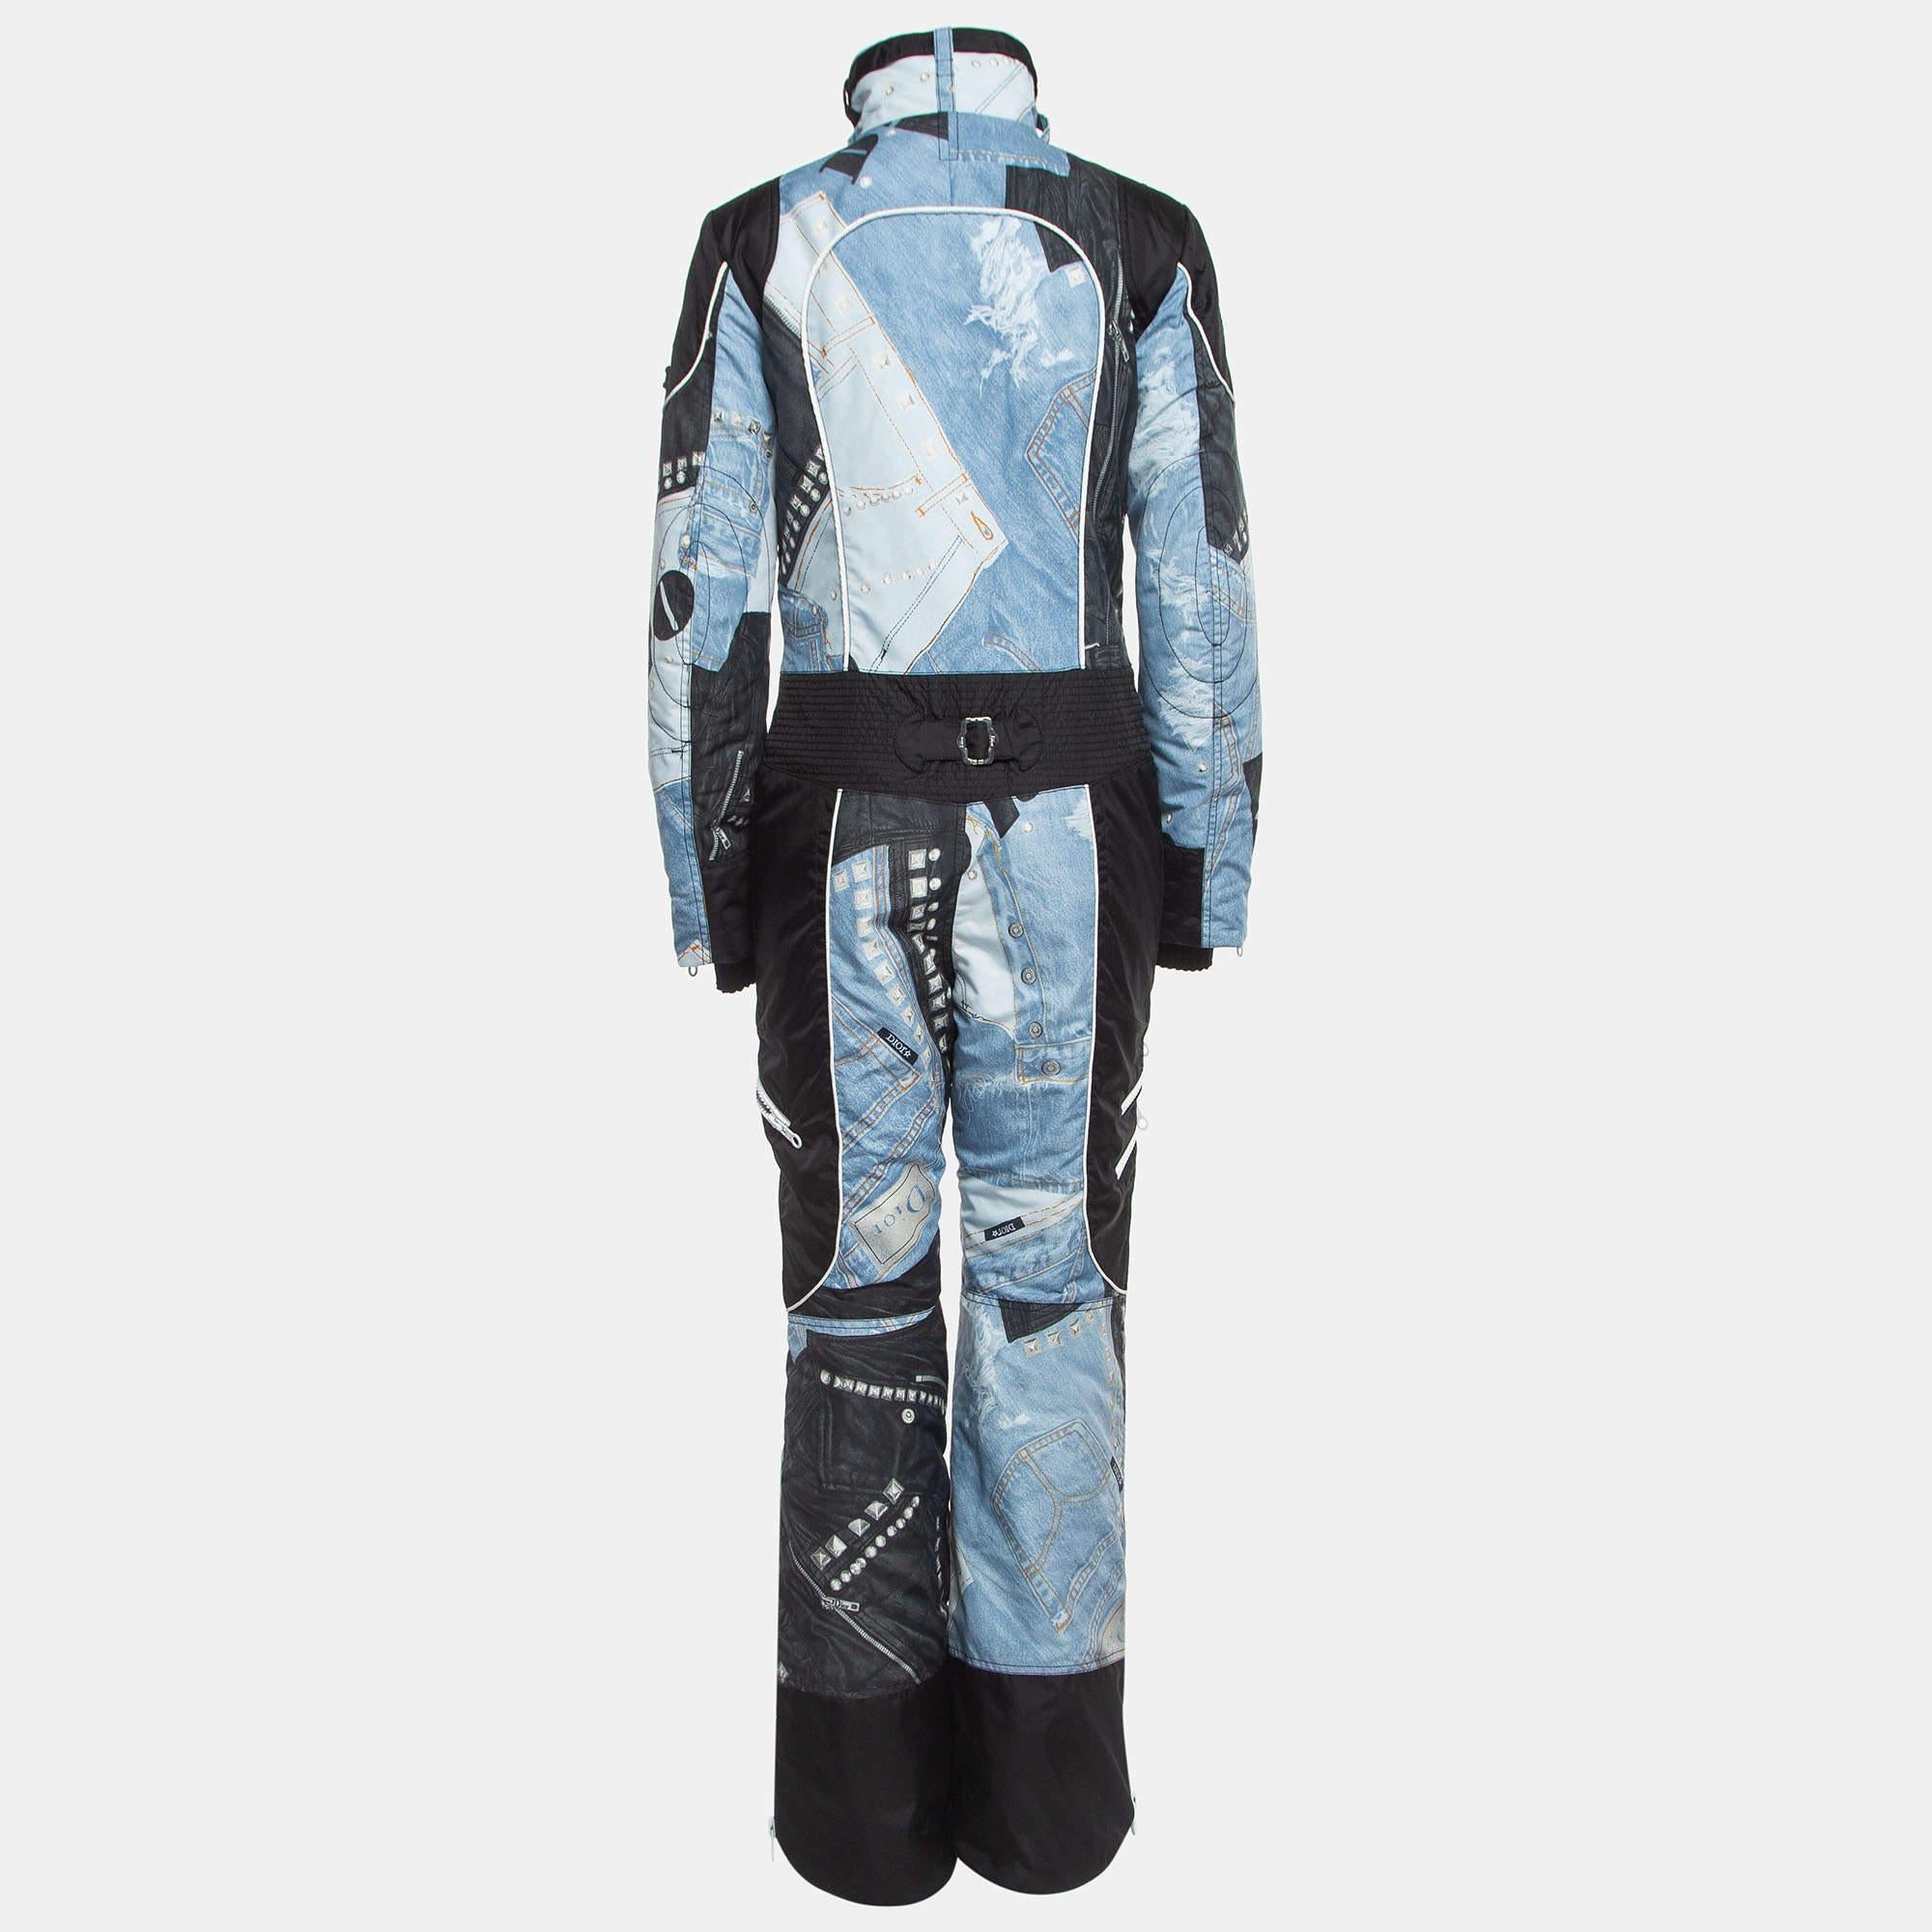 The Christian Dior Boutique ski suit is a luxurious winter essential. Crafted with precision, it features a sleek black & blue design, offering both style and functionality. All its components provide versatility, ensuring comfort and elegance on